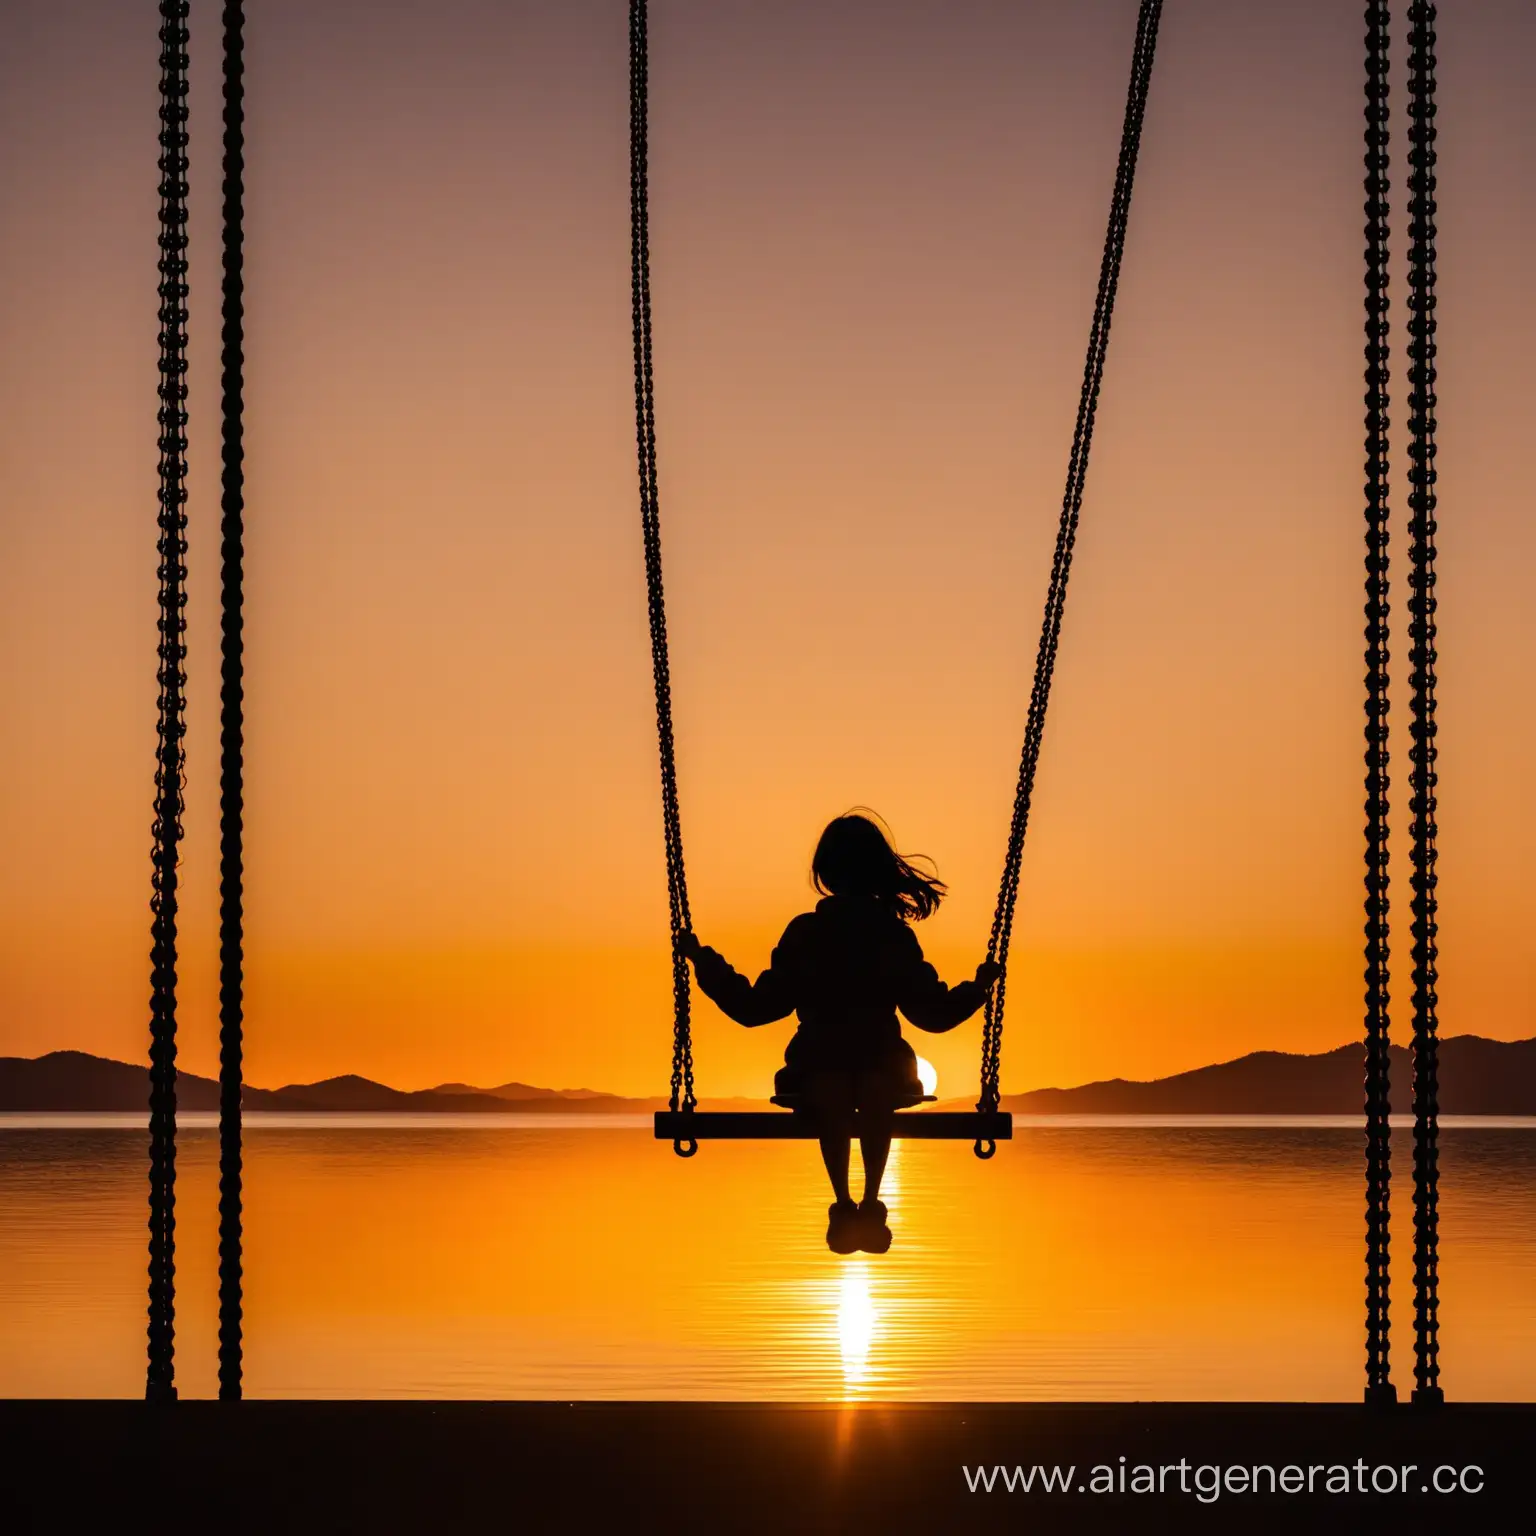 Silhouette-of-Person-Swinging-Against-Sunset-Sky